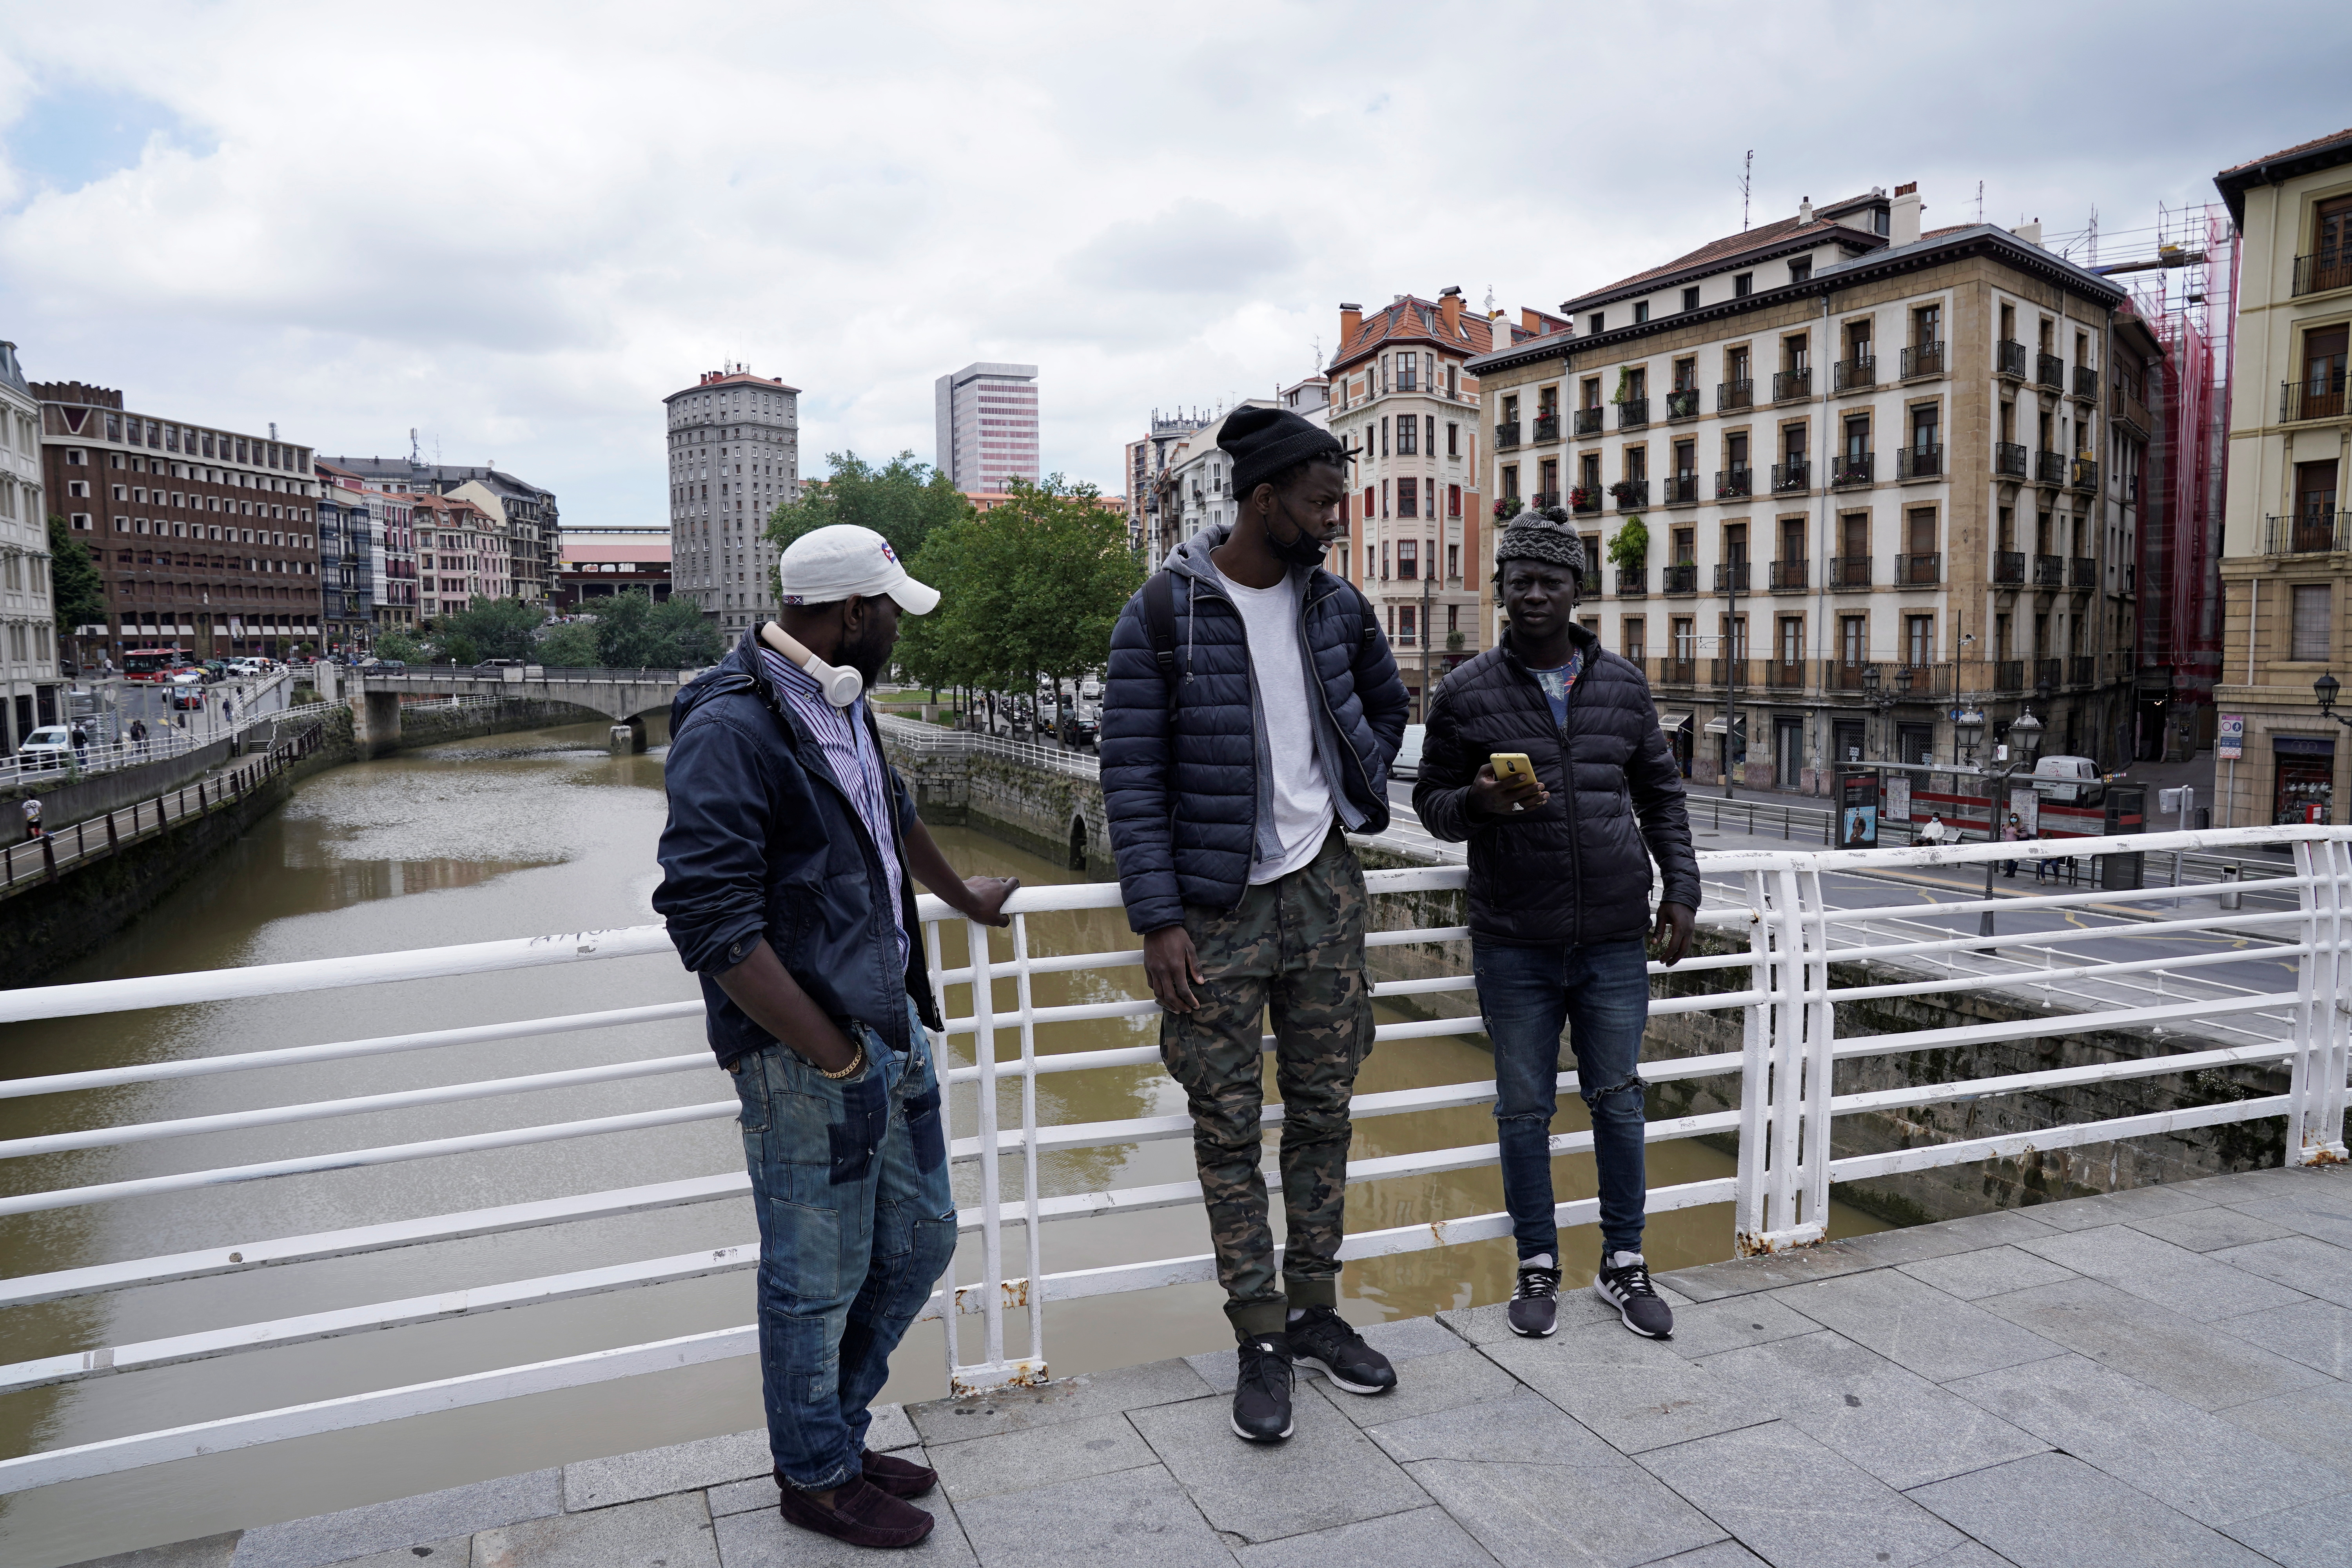 Mohamed Fadal Diouf, 26, from Senegal, stands with friends Matar y Serigne Sene on a pedestrian bridge over the river Nervion in Bilbao